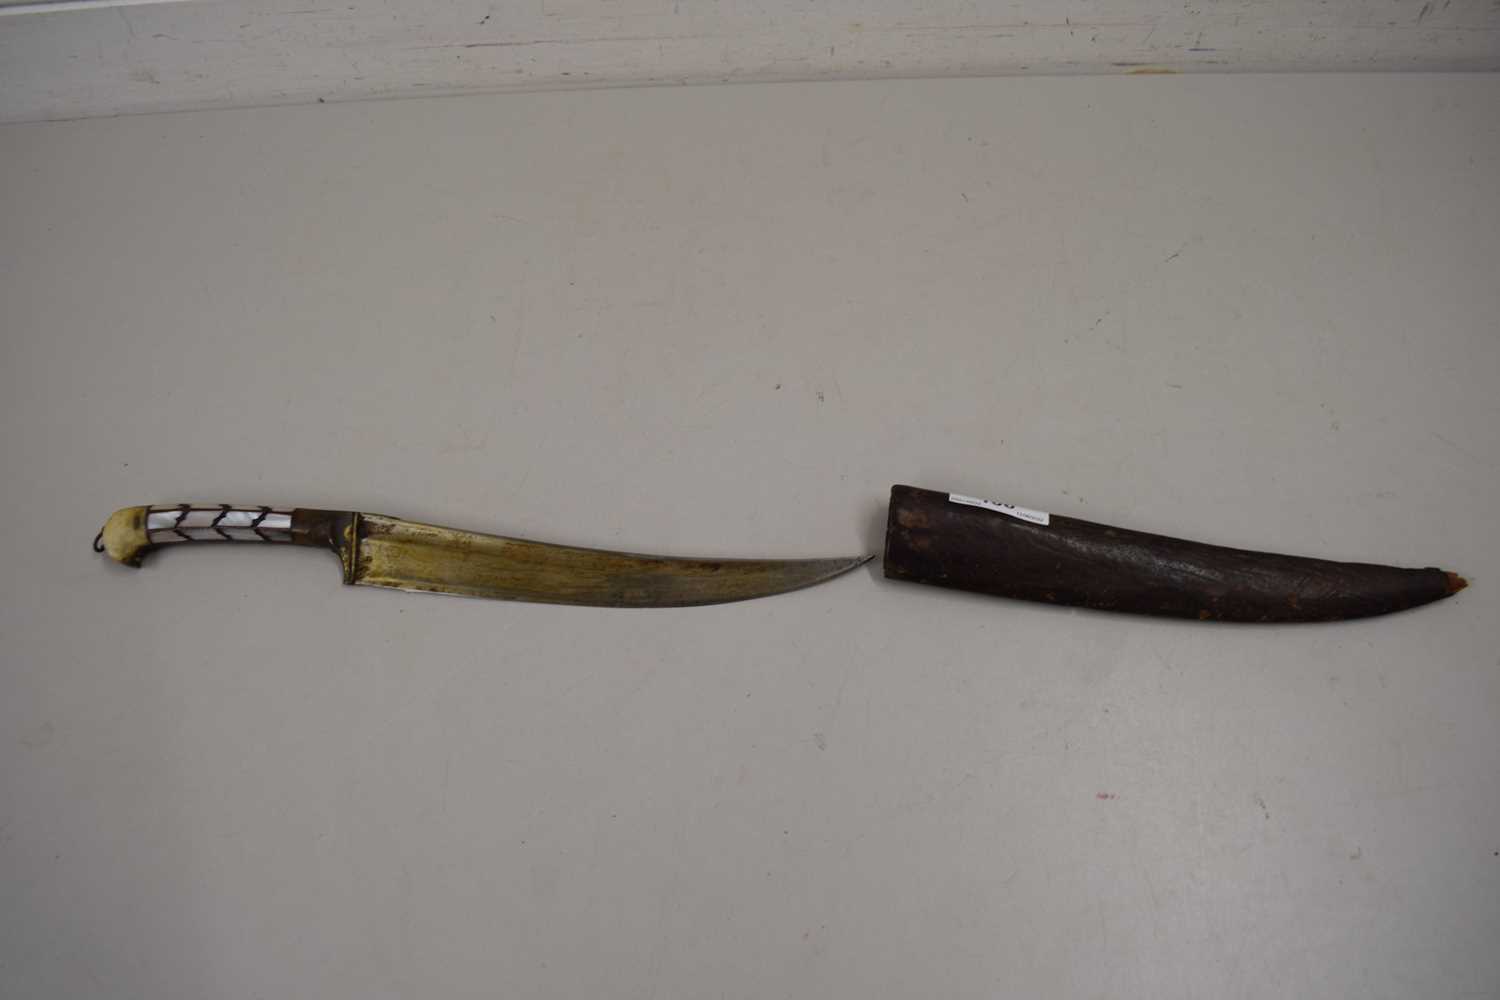 SMALL EASTERN DAGGER WITH MOTHER OF PEARL INLAID HANDLE AND LEATHER SHEATH